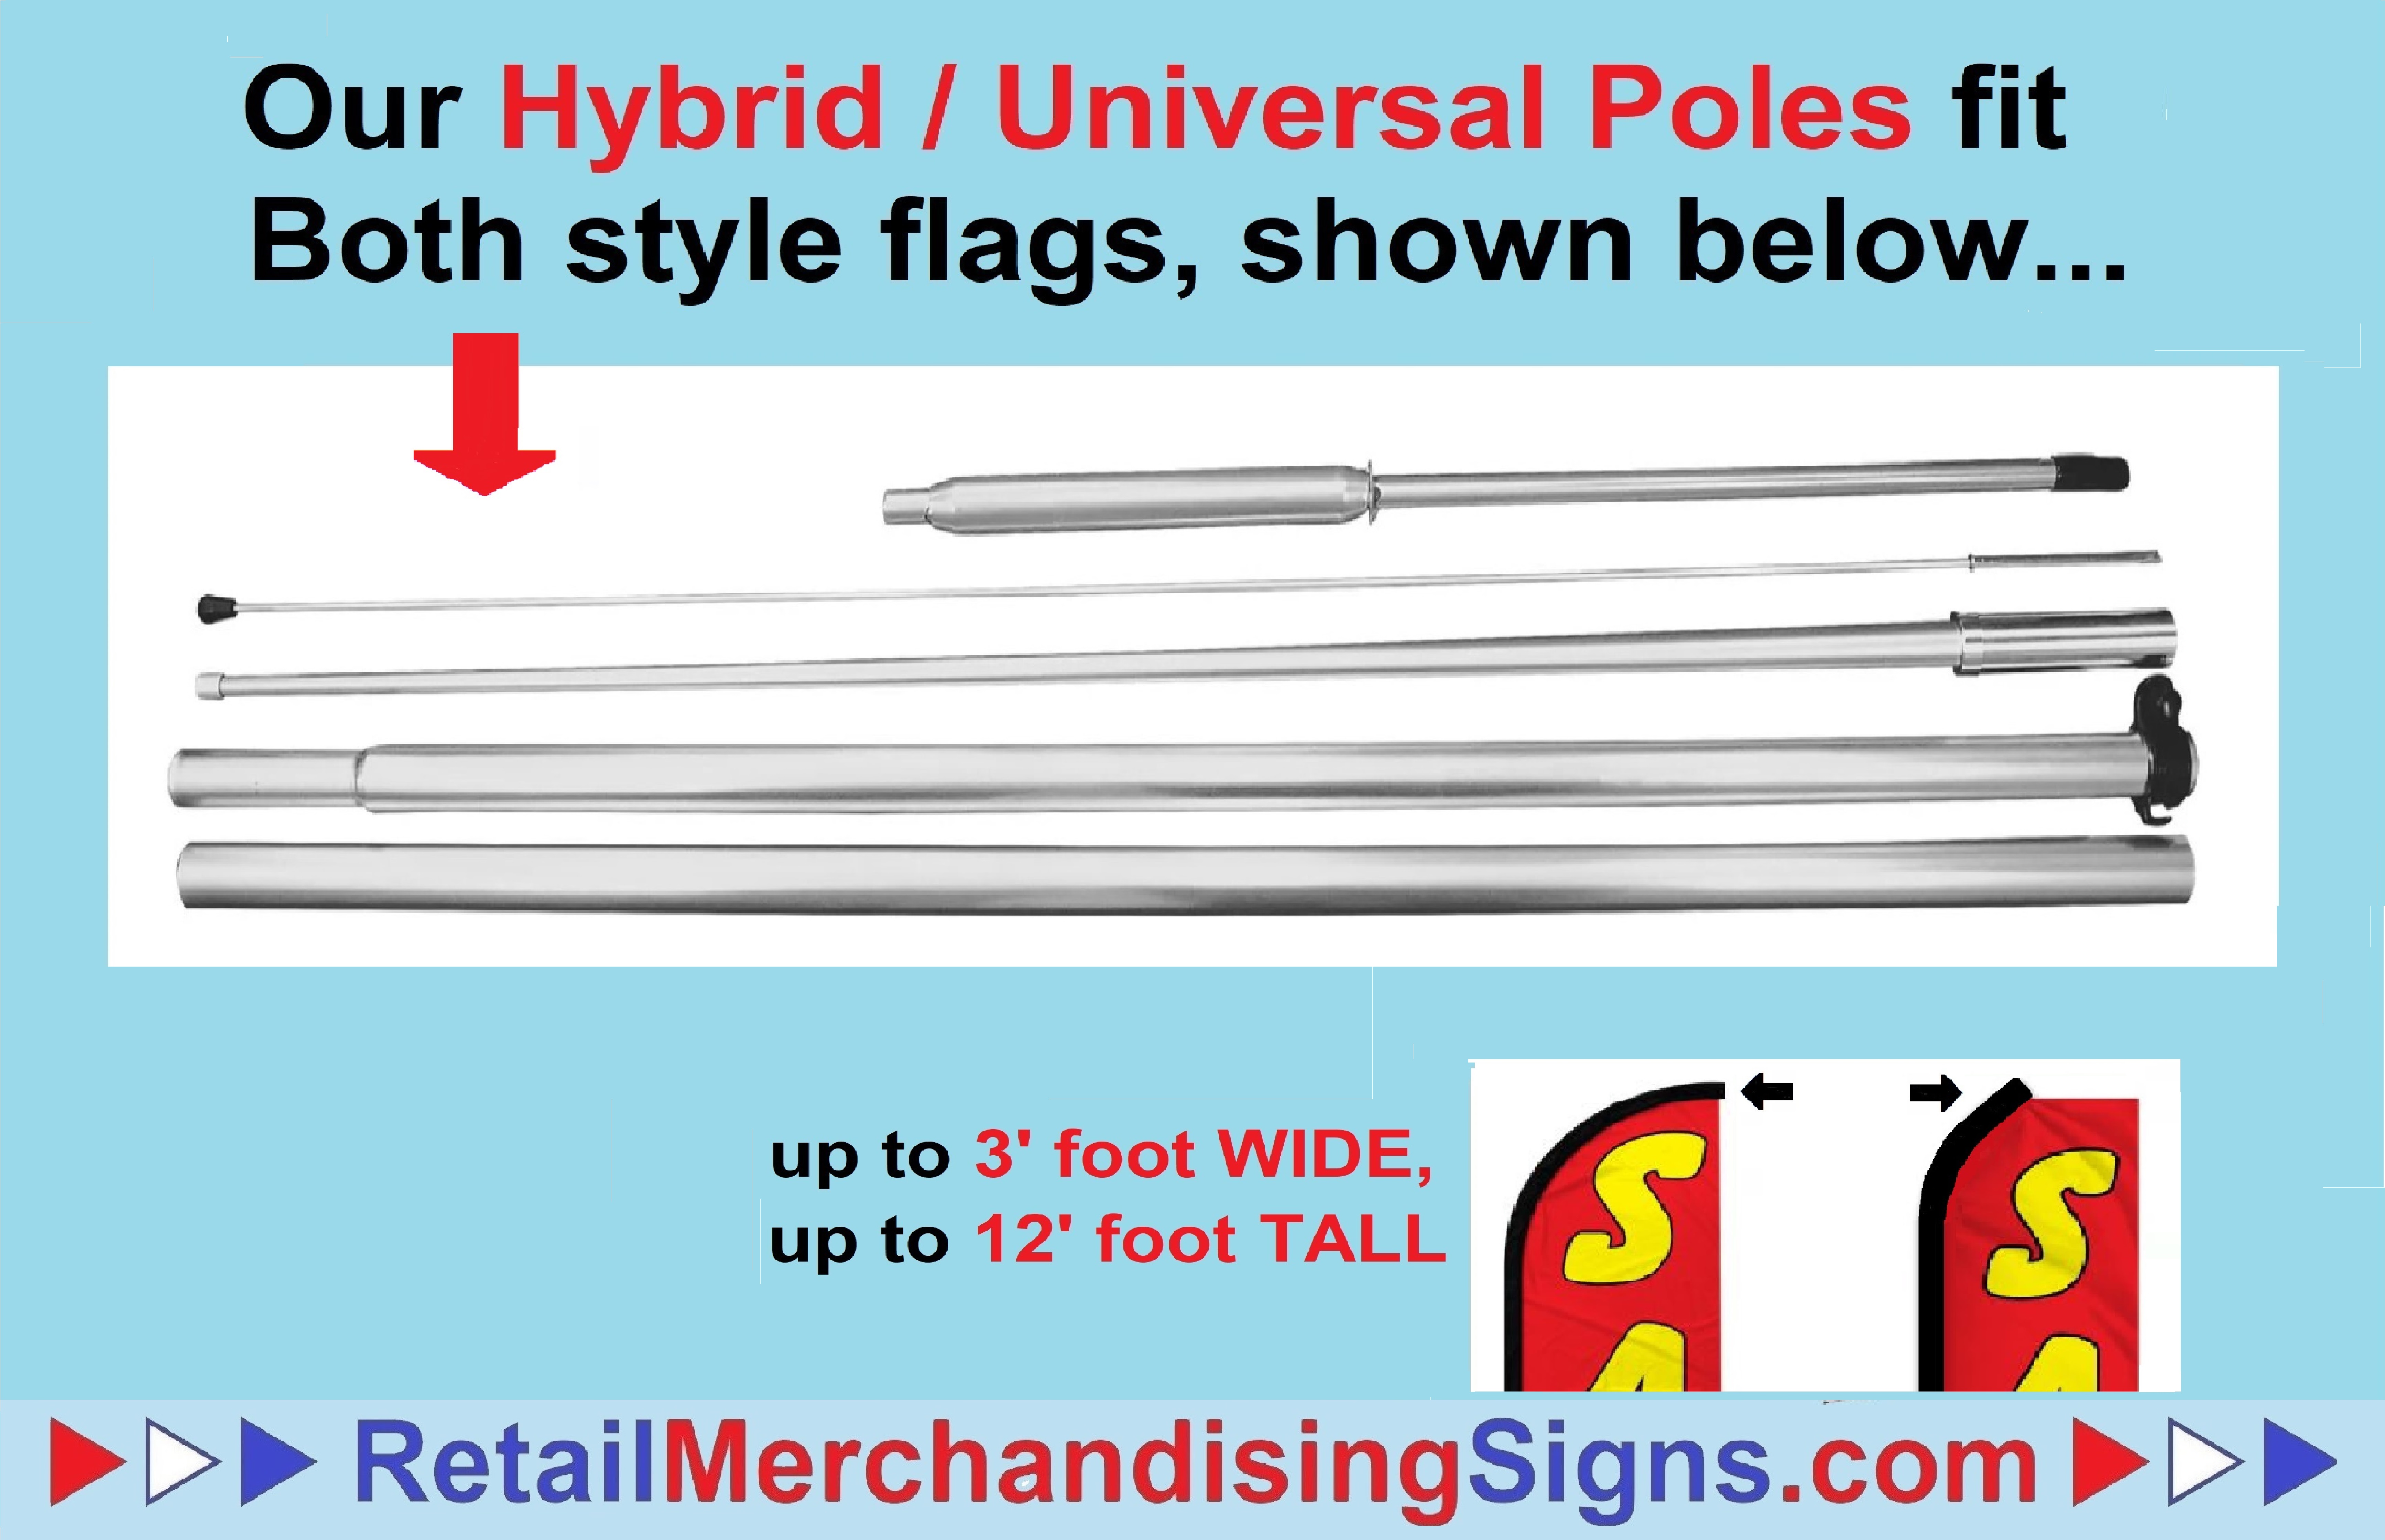 Poles fit both styles